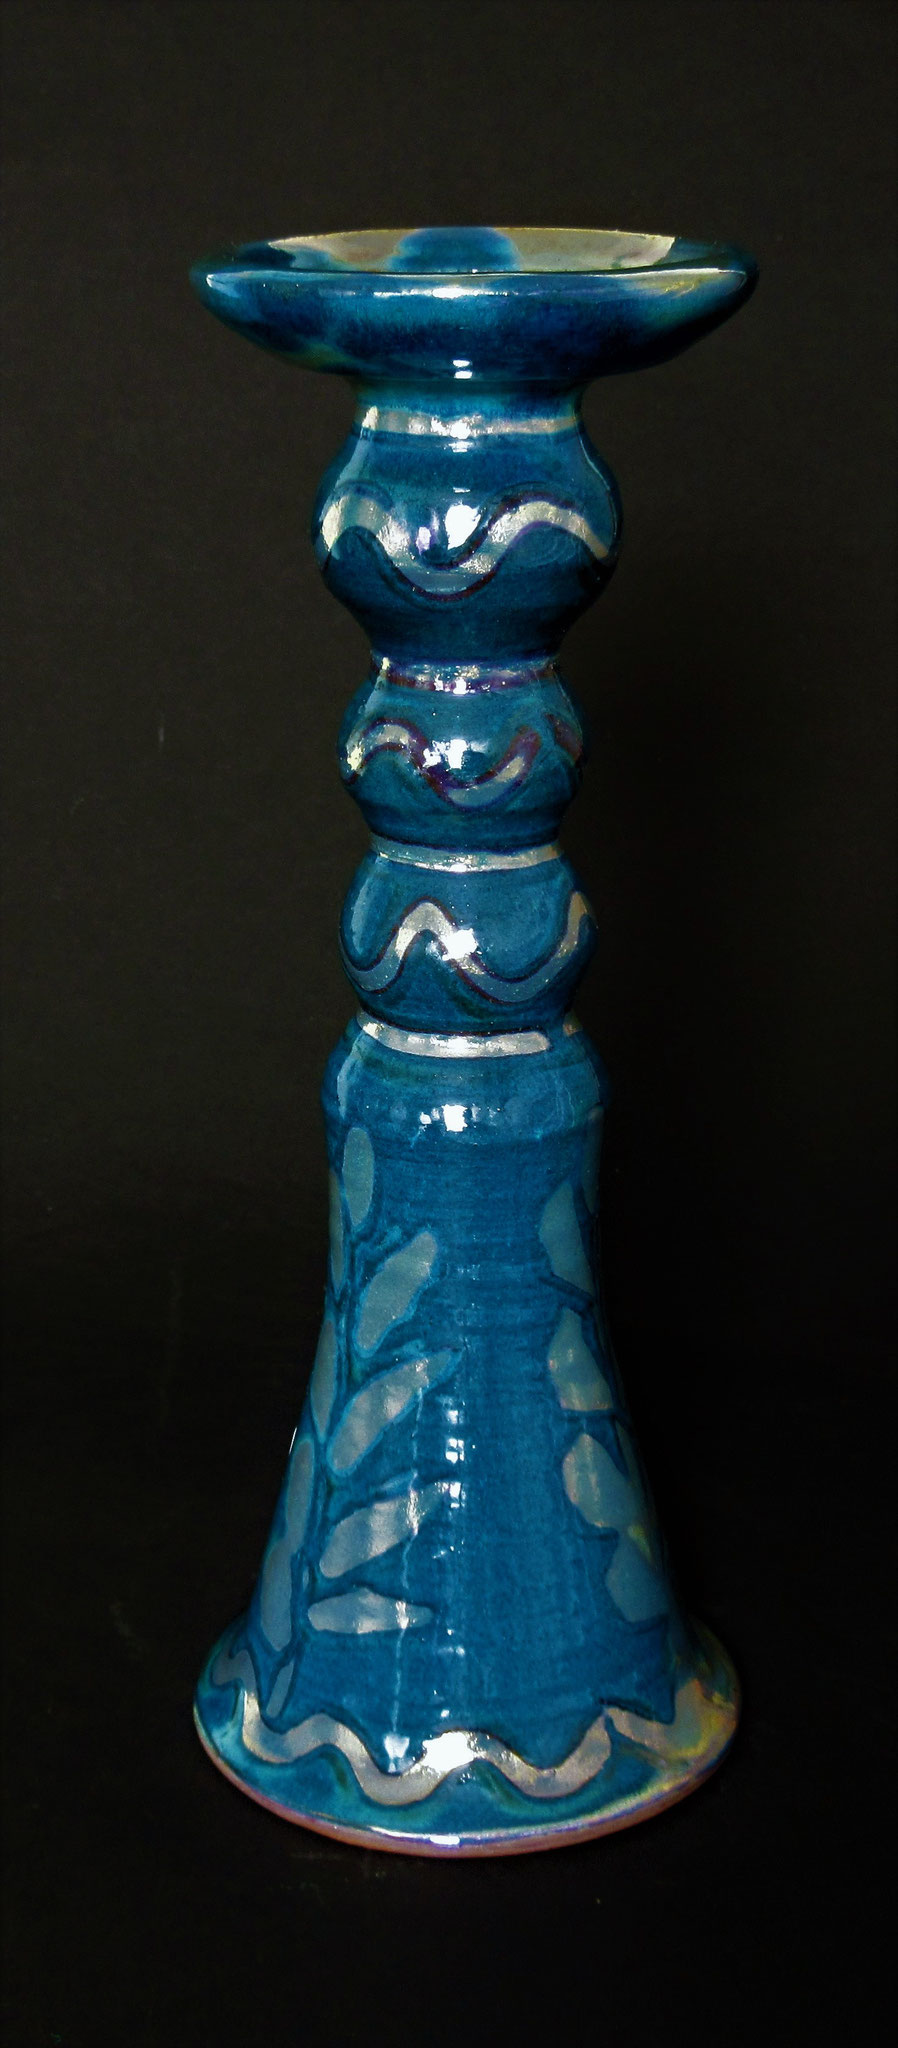 Candlestick. 30cm high. £65. Various designs from Rum's Eg gallery. 